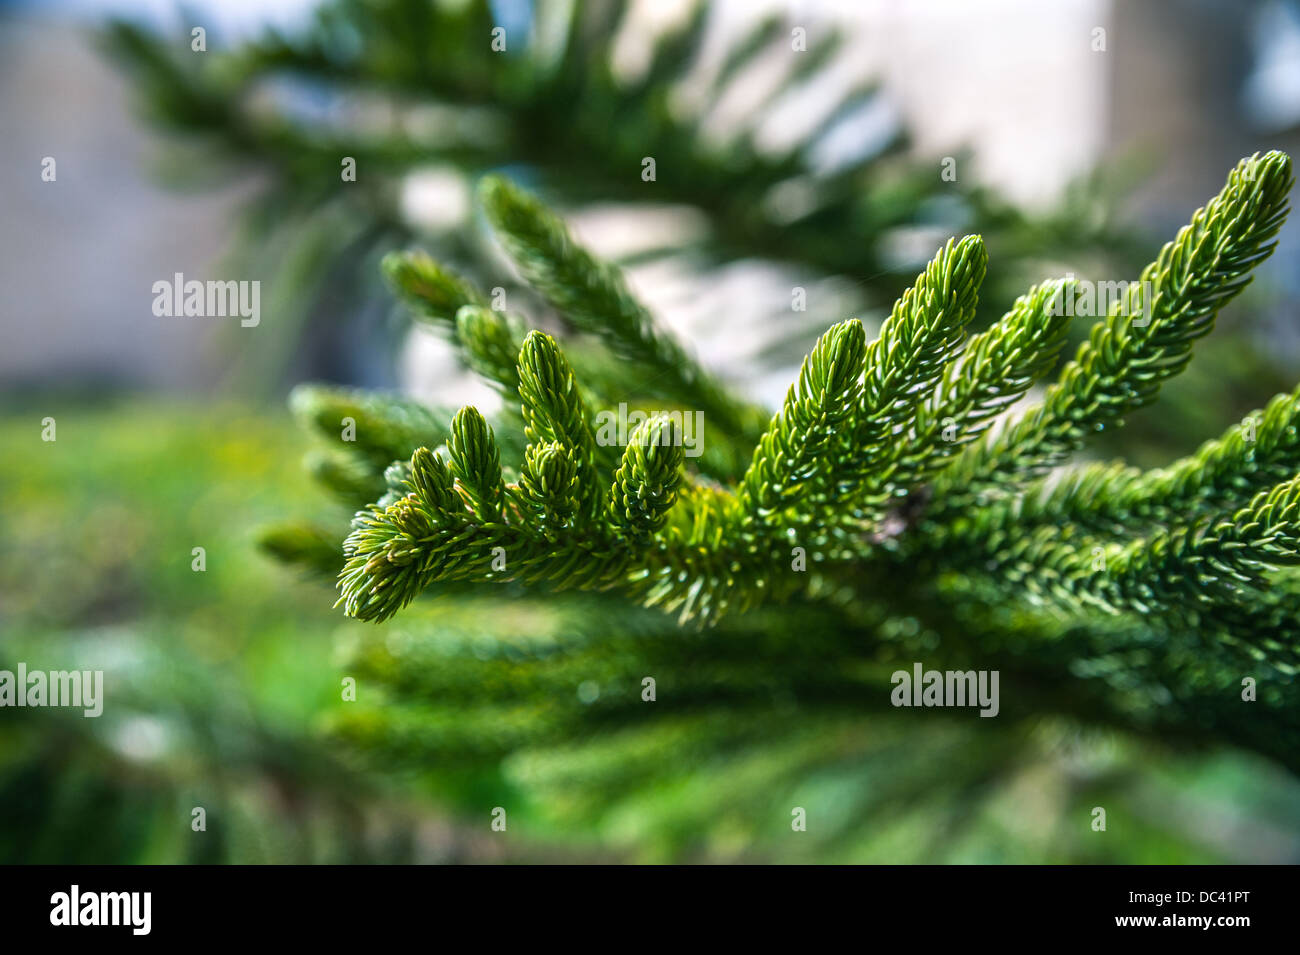 Green lush fur-tree branch of the natural growing tree Stock Photo